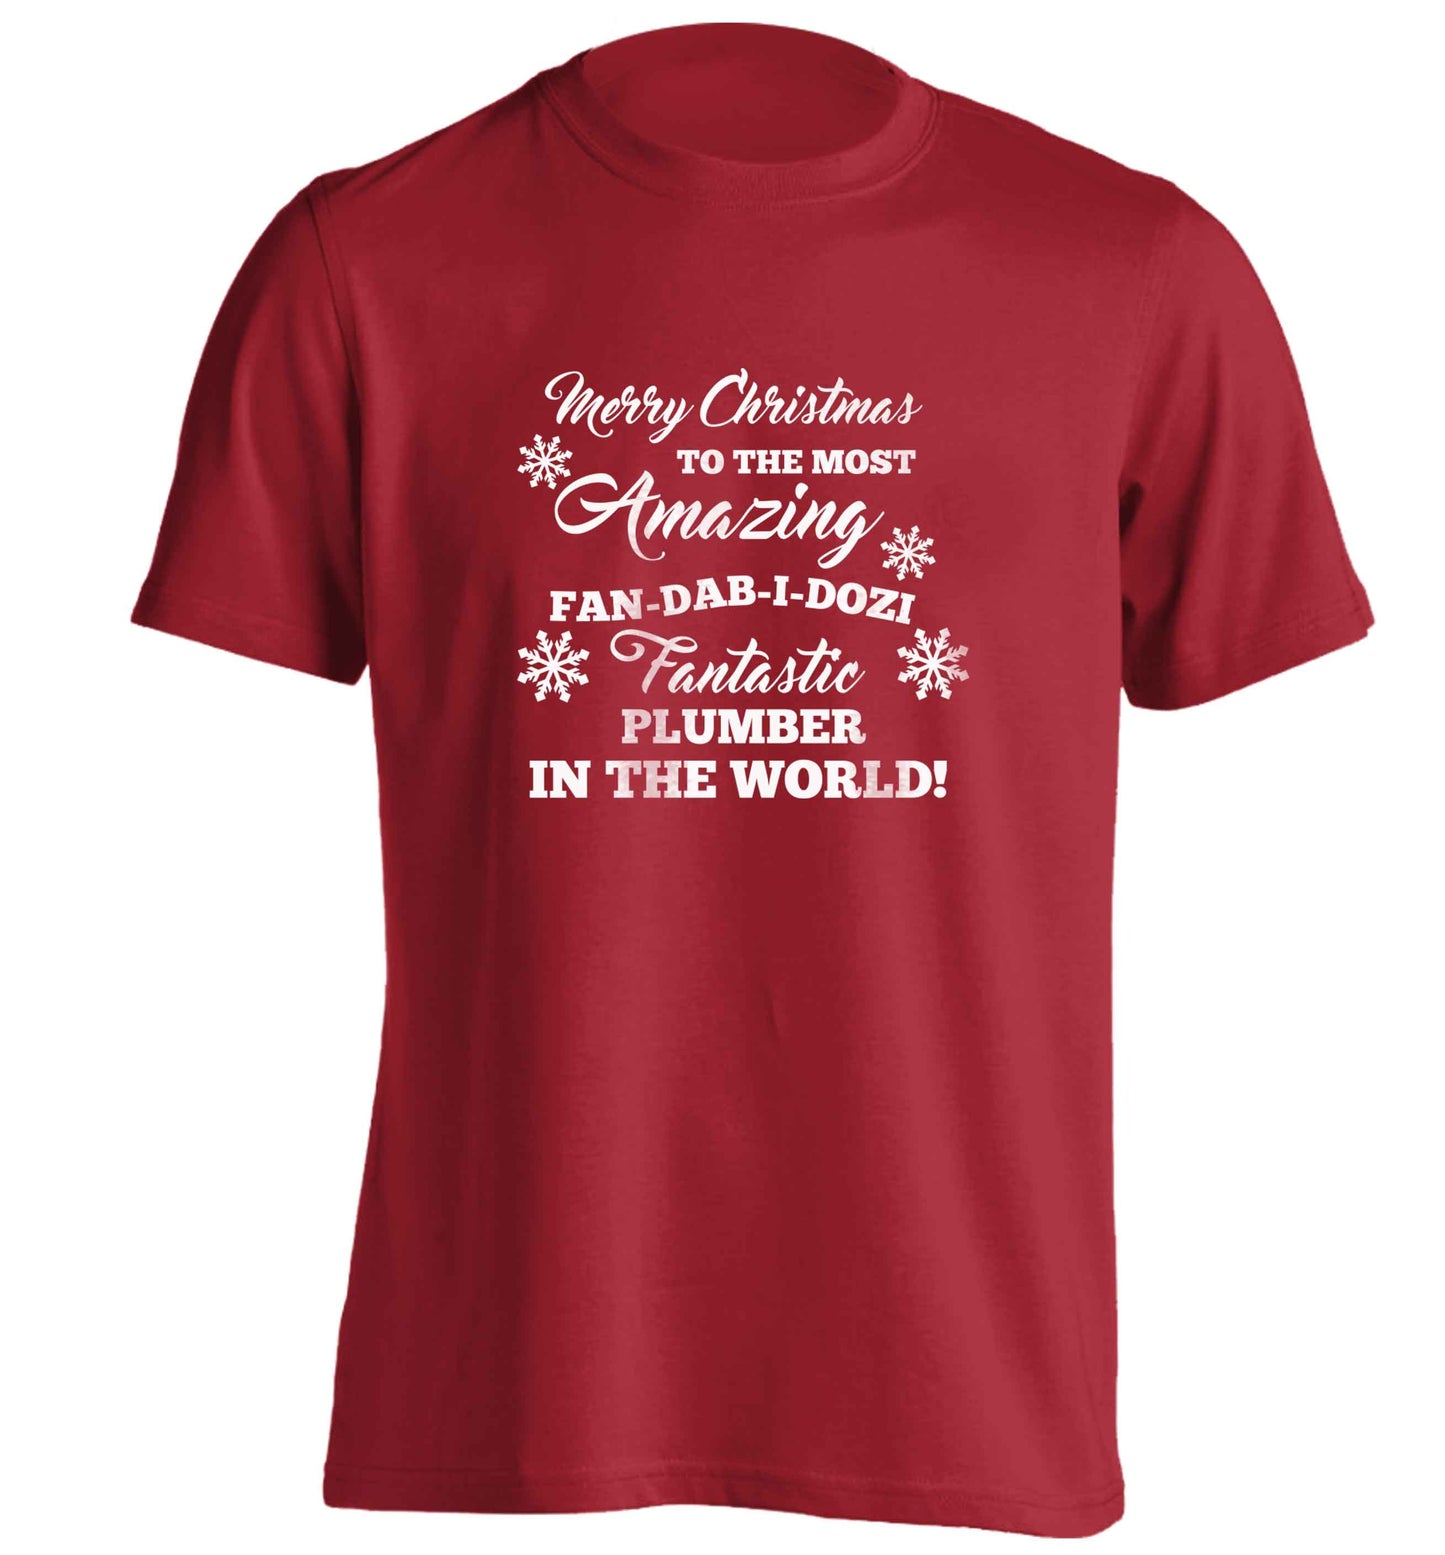 Merry Christmas to the most amazing plumber in the world! adults unisex red Tshirt 2XL